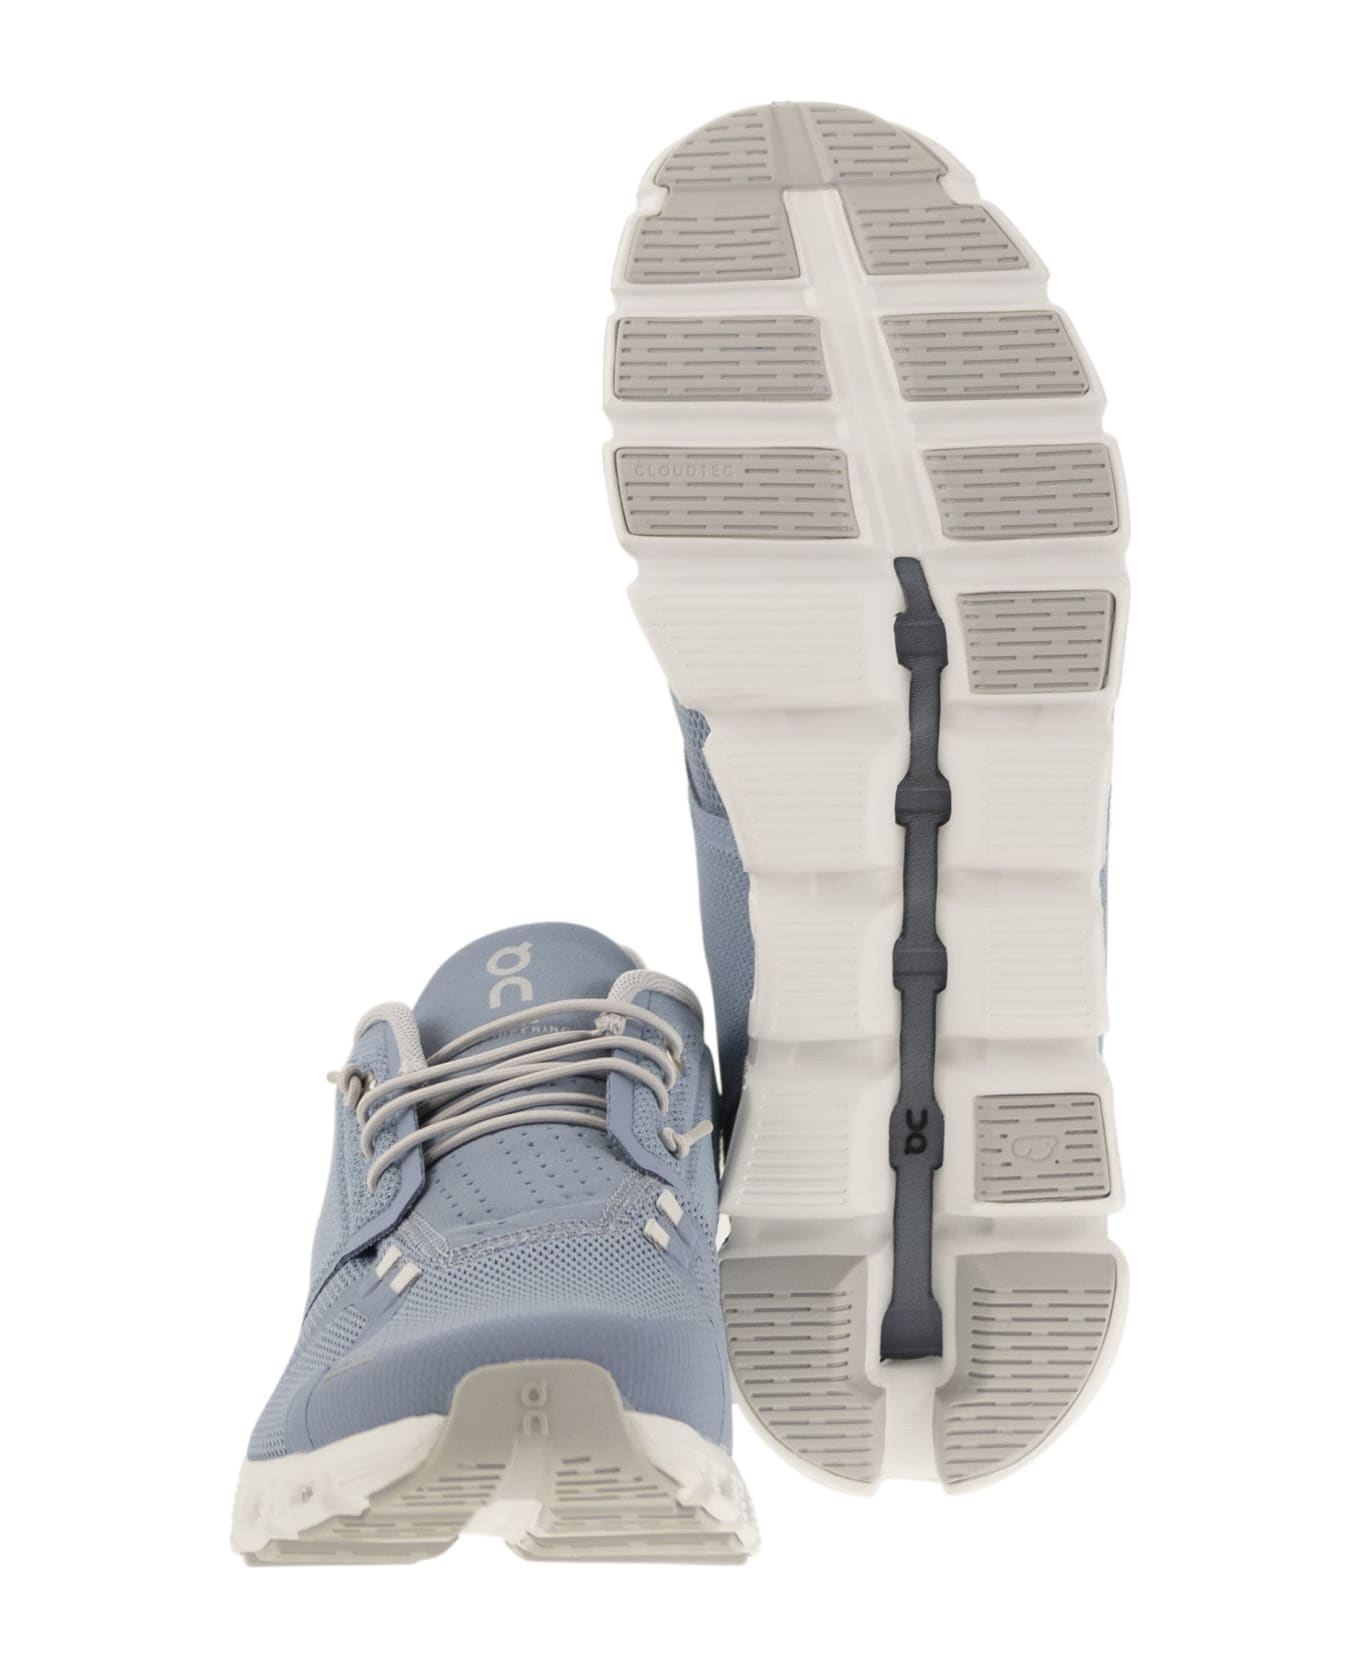 ON Cloud 5 - Sneakers - Chambray/white